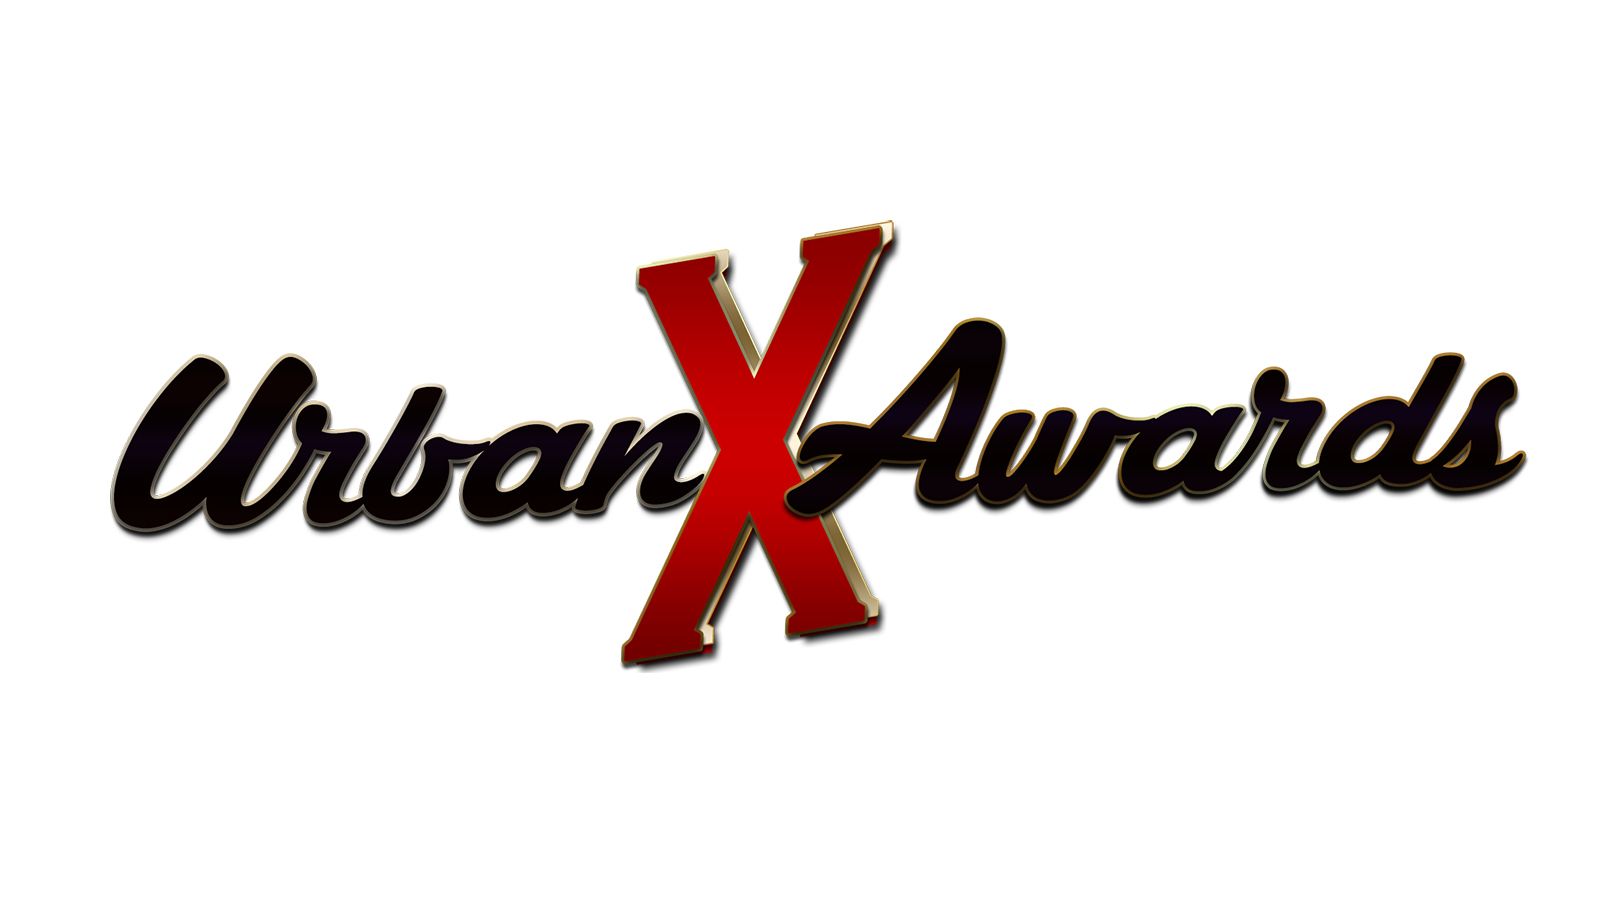 Two Parties Kick Off Urban X Awards Weekend